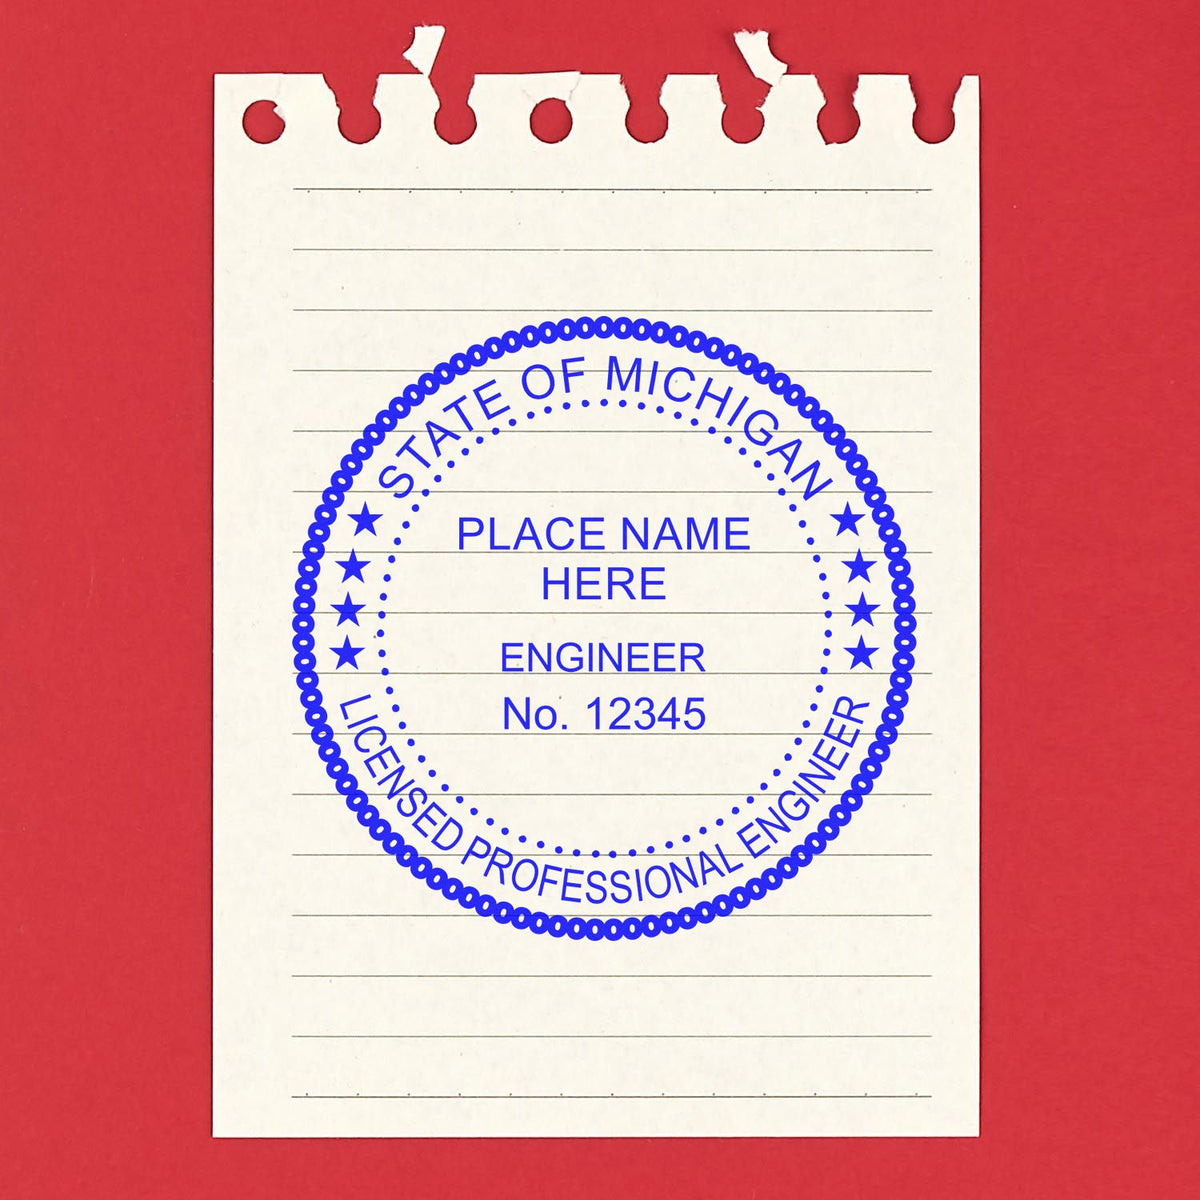 The Digital Michigan PE Stamp and Electronic Seal for Michigan Engineer stamp impression comes to life with a crisp, detailed photo on paper - showcasing true professional quality.